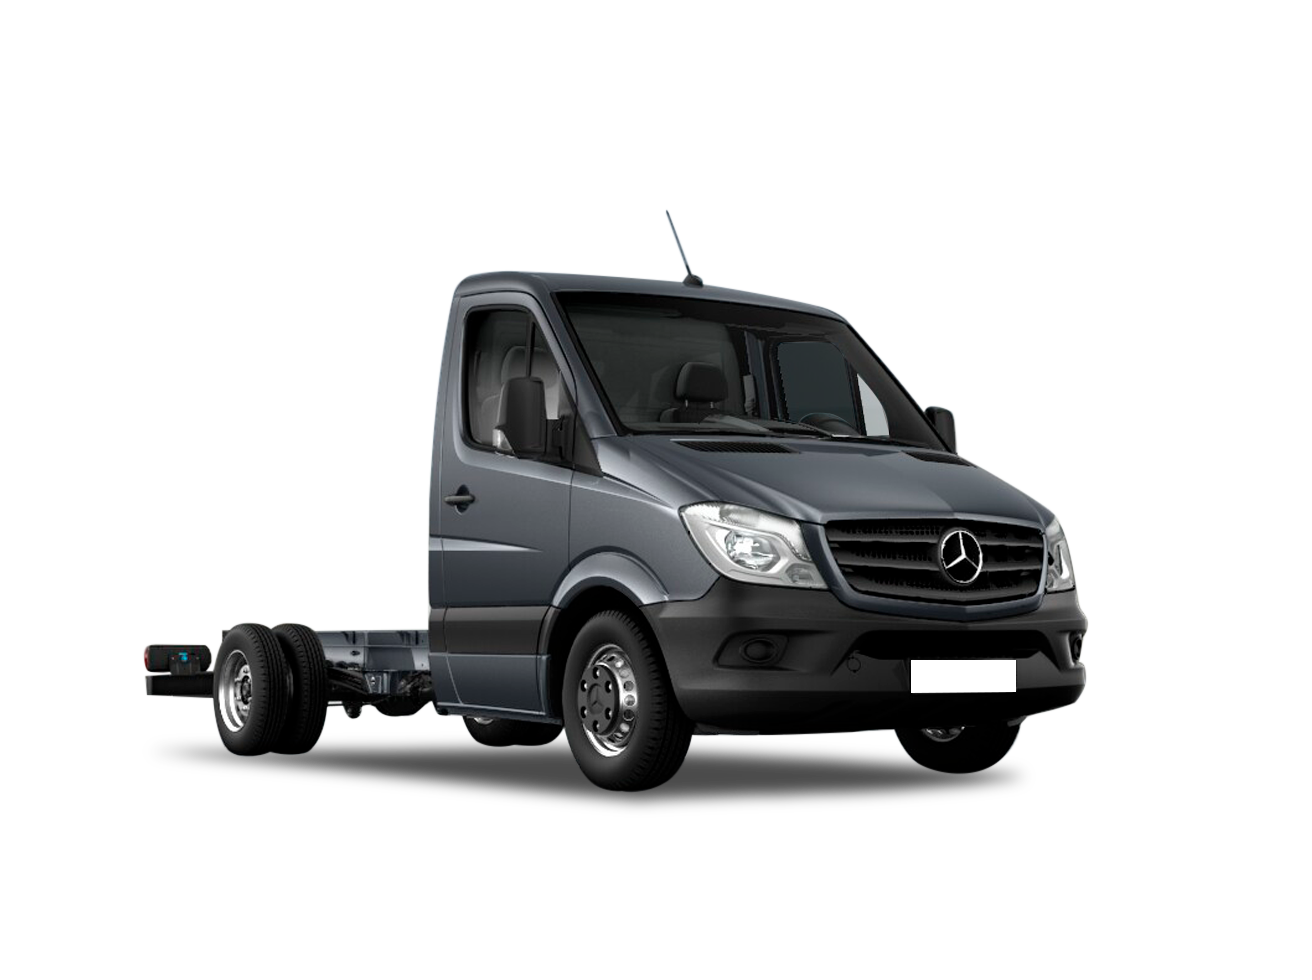 MERCEDES-BENZ - SPRINTER - 2.2 CDI DIESEL CHASSIS 515 EXTRA LONGO MANUAL